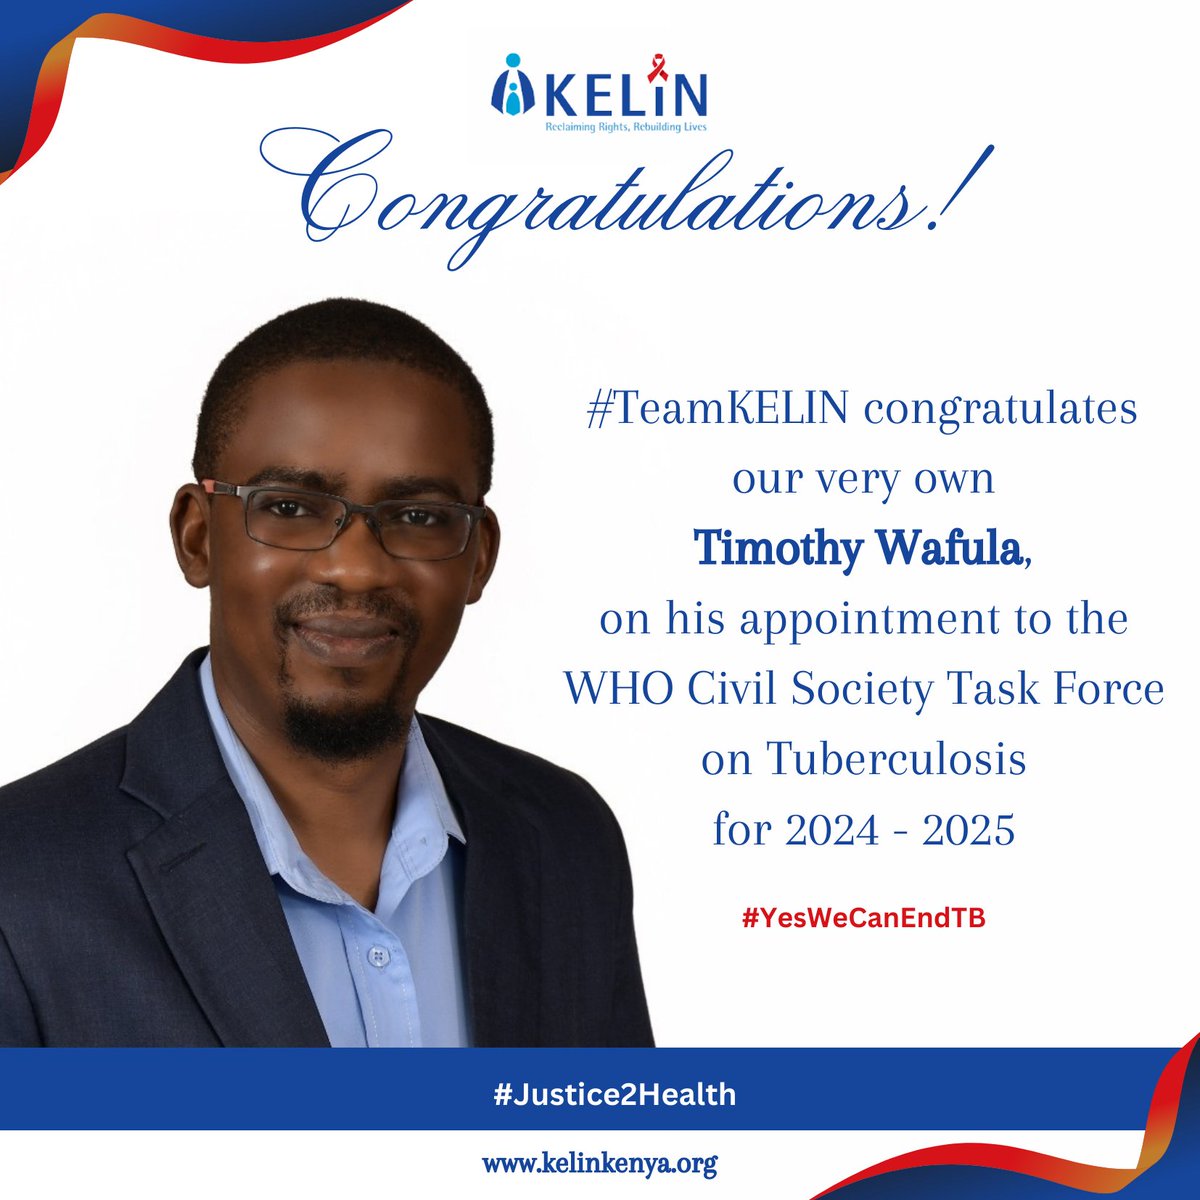 🎉 Thrilling news from @KELINKenya! 🌟Delighted to announce @wanameme's appointment to the @WHO Civil Society Task Force on Tuberculosis. His role includes amplifying grassroots voices and priorities. Let's join in celebrating this remarkable achievement! createsend.com/t/d-18A3511E6F…